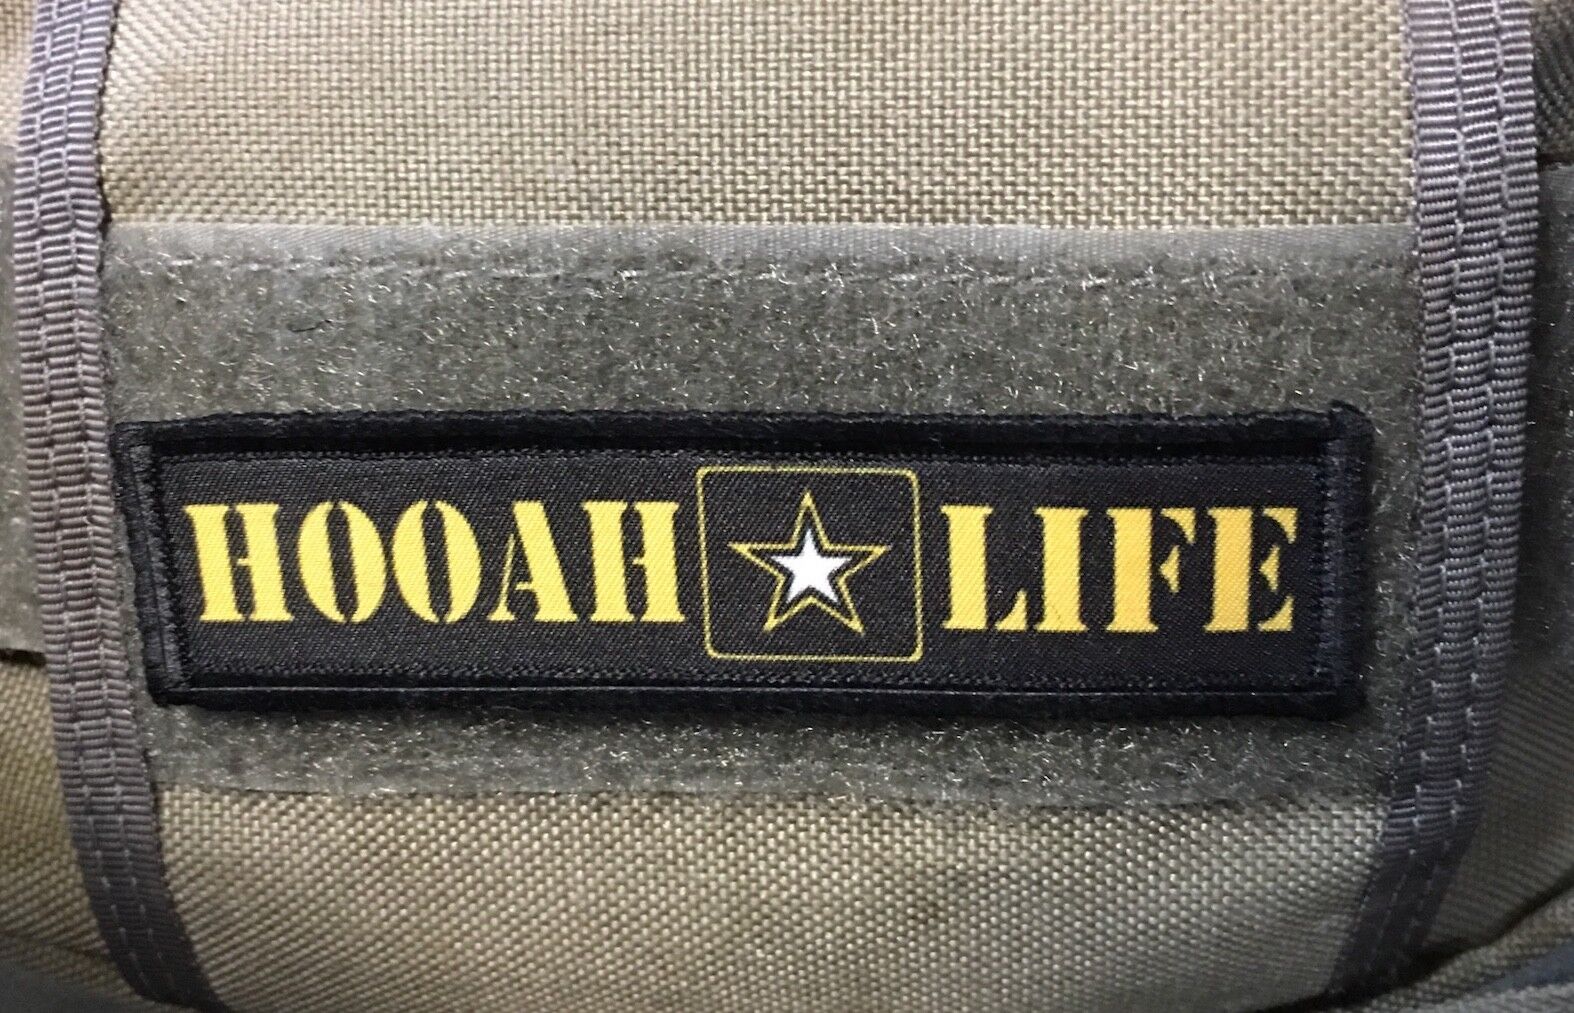 1x4 HOOAH Life Morale Patch Tactical Army Badge flag hook tab 